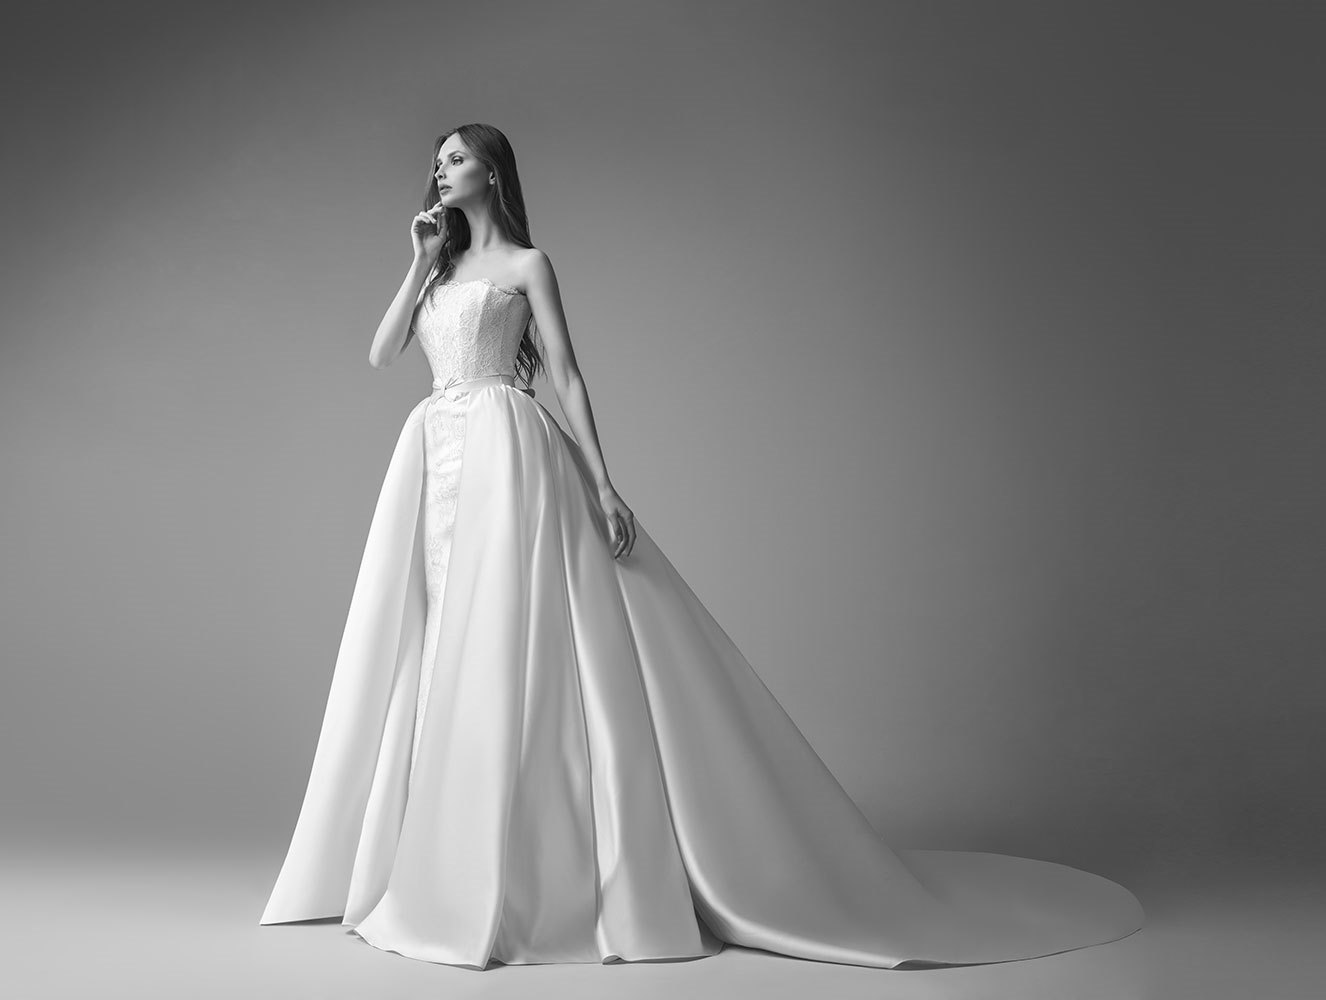 Dramatic Wedding Dress with Overskirt from Saiid Kobeisy's 2017 Collection